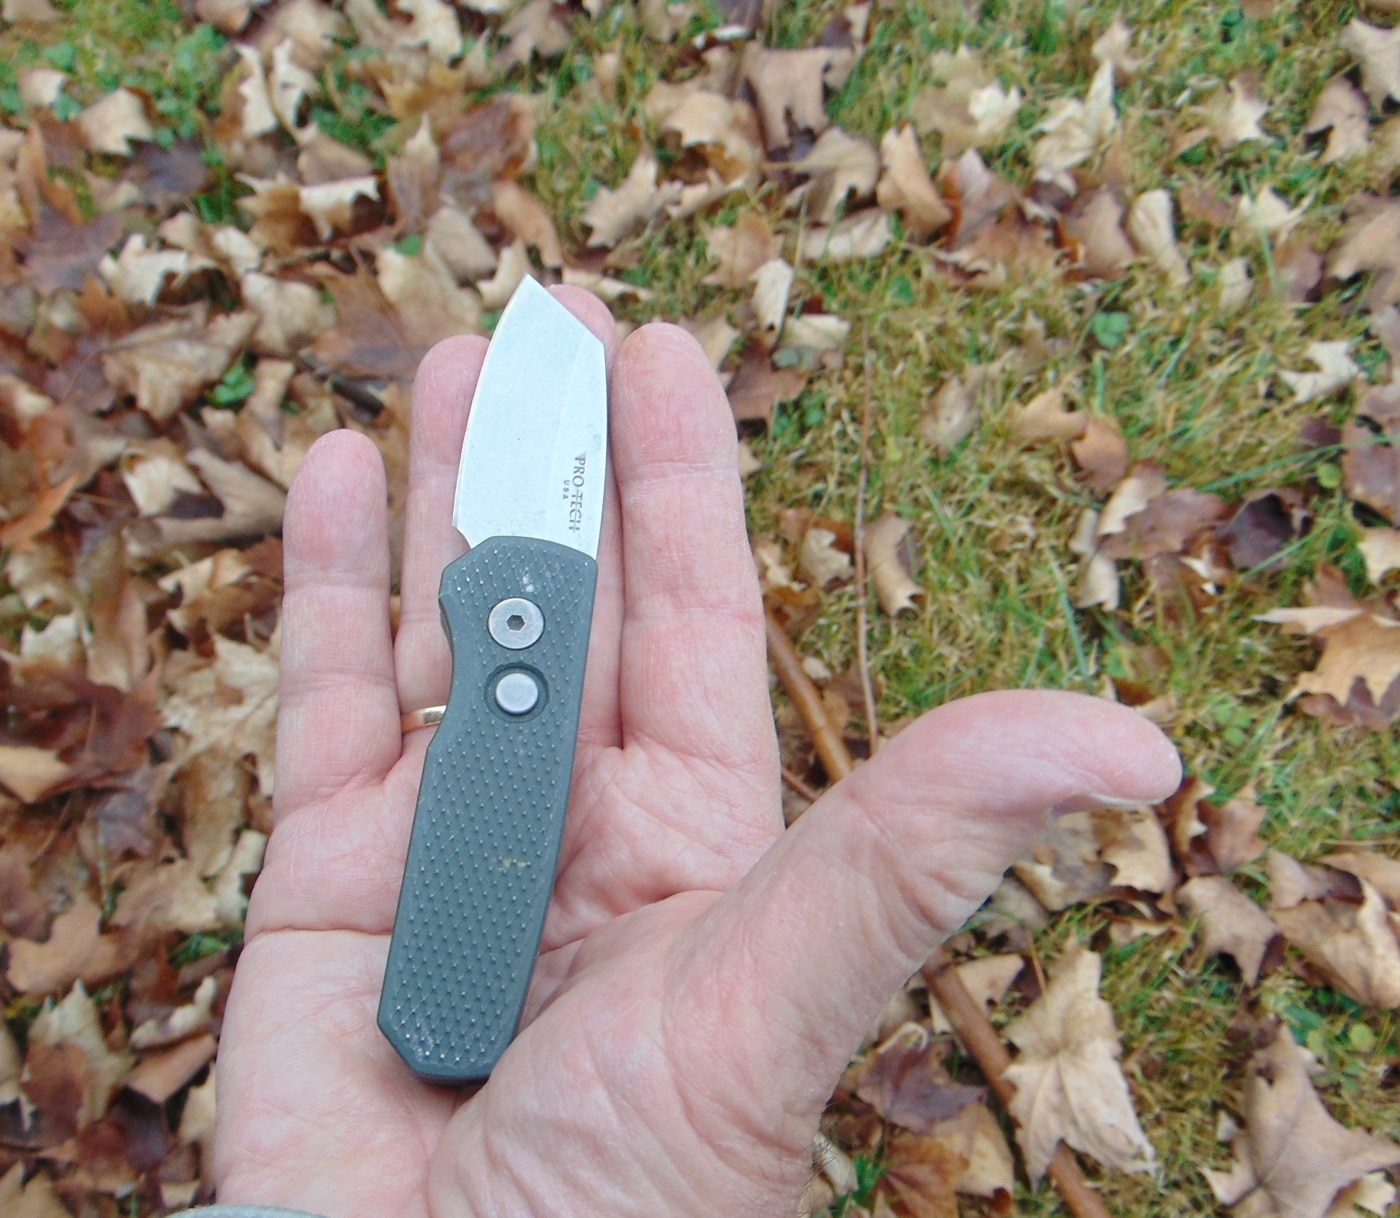 In this photo, the author demonstrates the size of the Runt 5. The black-anodized aluminum handle can be had with aluminum scales that are not too thick making it easy to maneuver while still keeping it secure when locked open. The matte finish, most people agree, won't accidentally rub off. It's easy to clean and it's also a better user experience than polymer handles found on some cheaper knives.